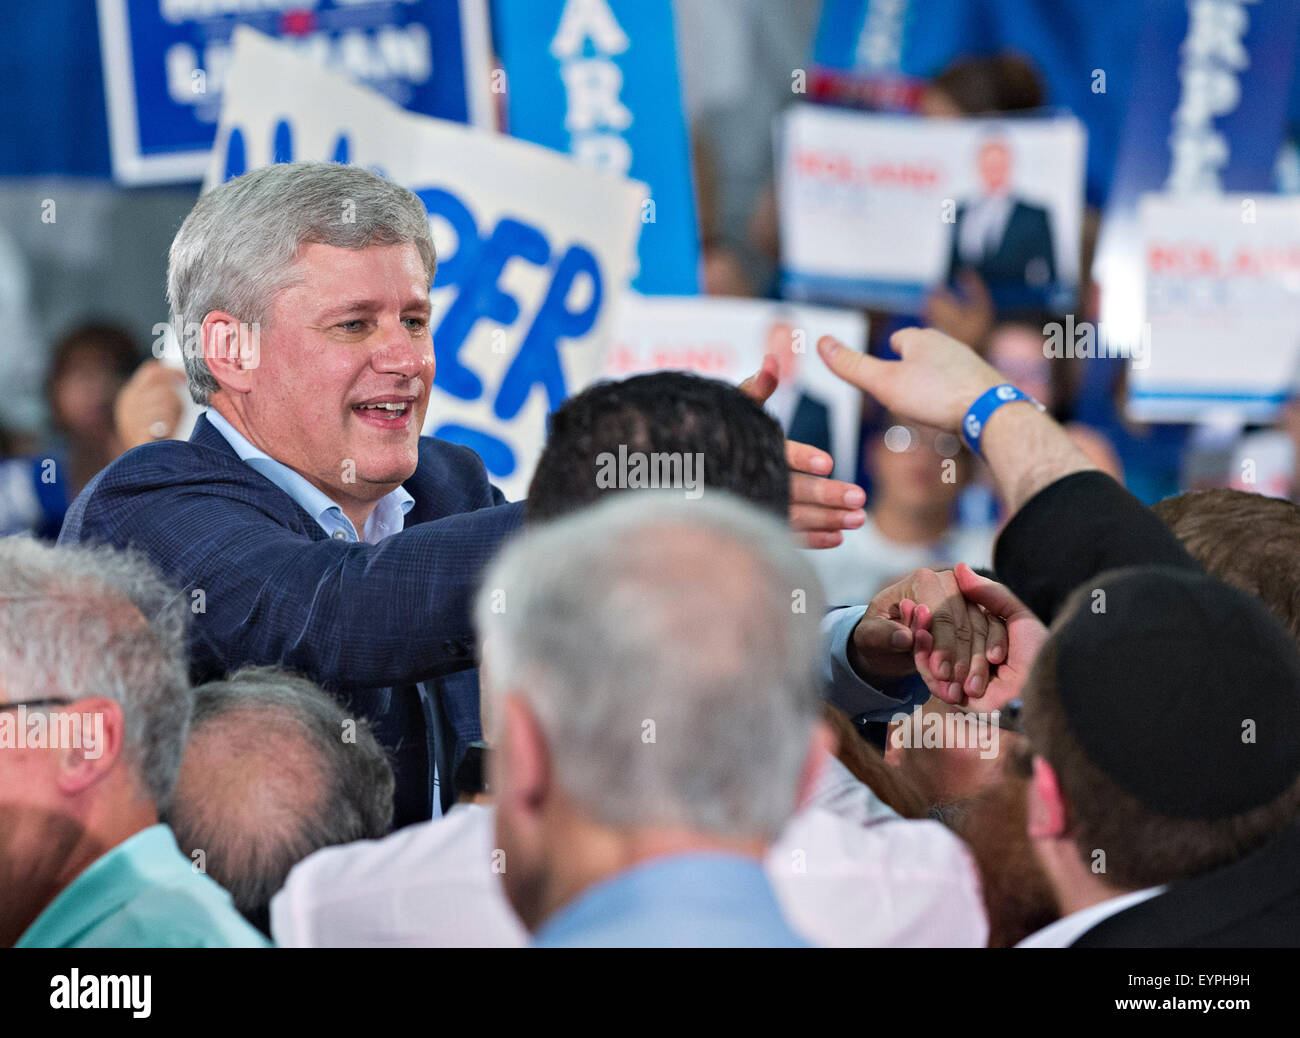 Montreal, Canada. 2nd Aug, 2015. Canadian Prime Minister Stephen Harper greets supporters during a rally in Montreal Aug. 2, 2015. Stephen Harper on Sunday called a parliamentary election for Oct. 19 and kicked off his Conservative party's election campaign. Credit: Andrew Soong/Xinhua/Alamy Live News Stock Photo